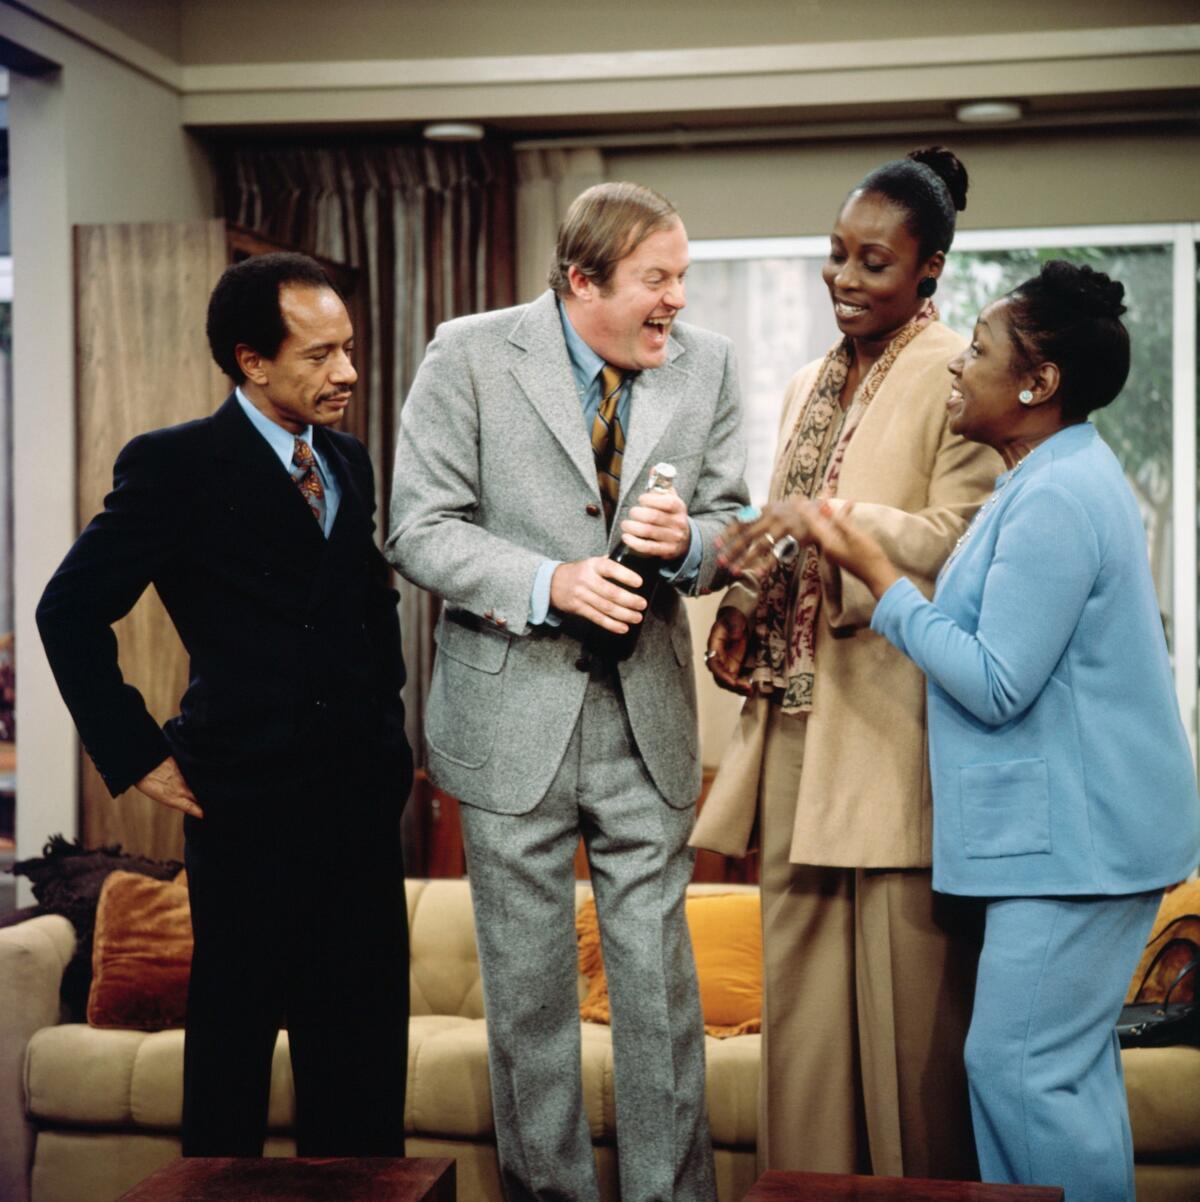 Two men and two women standing in a living room laughing.